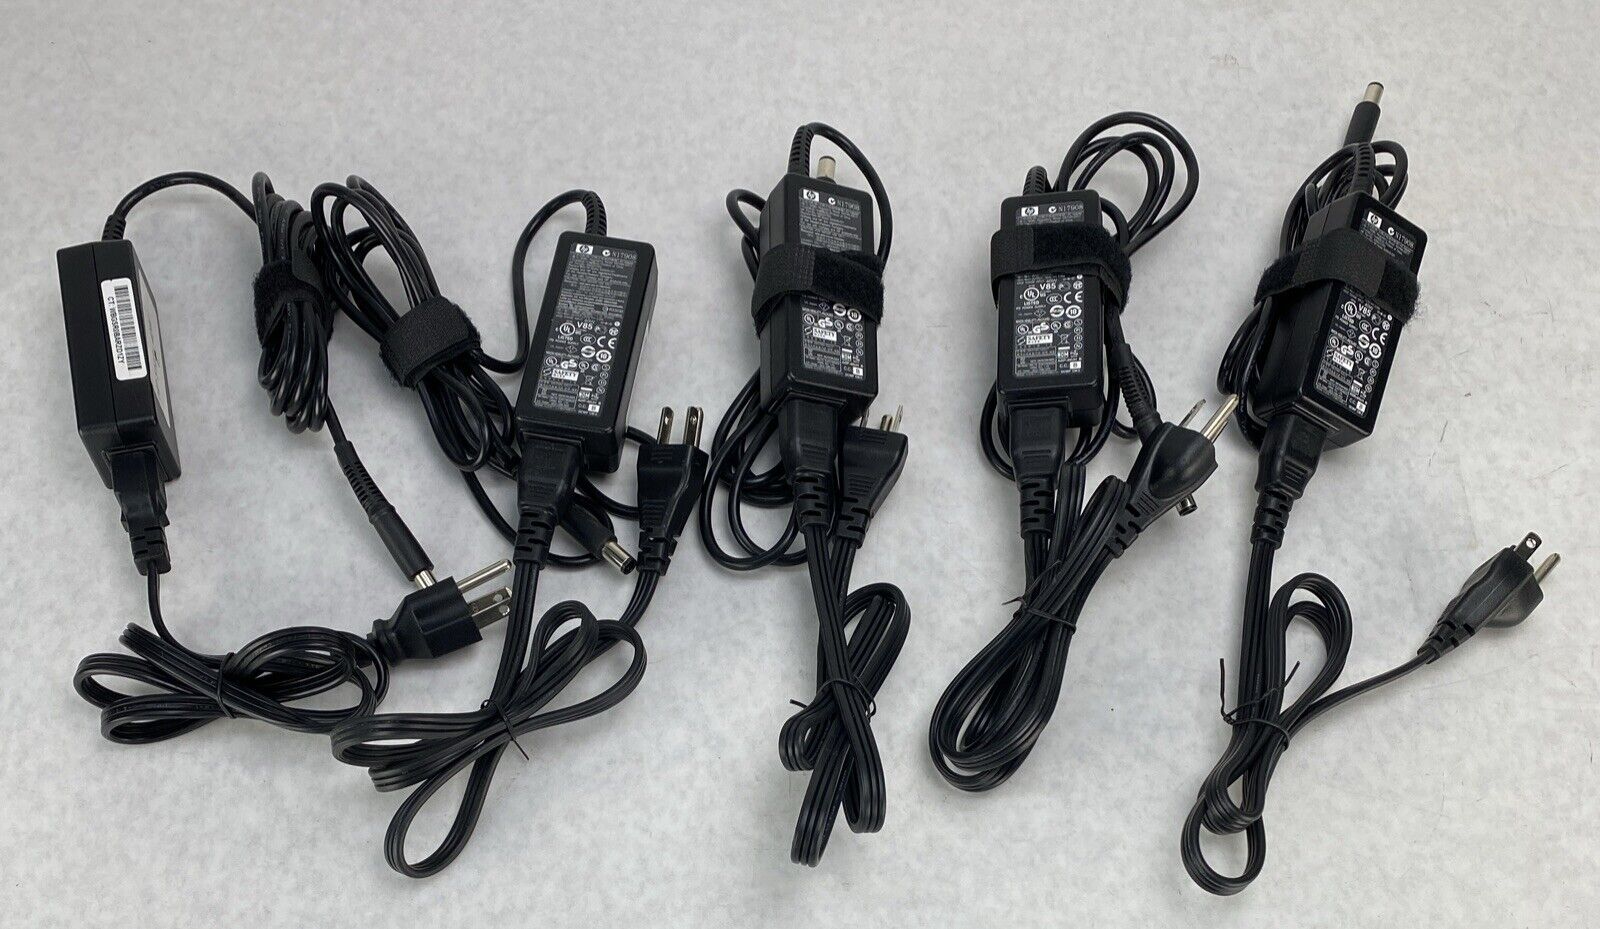 Lot(5) HP 608423-002 Genuine 40W AC Adapter 19.5V 2.0A Laptop Charger 609938-001